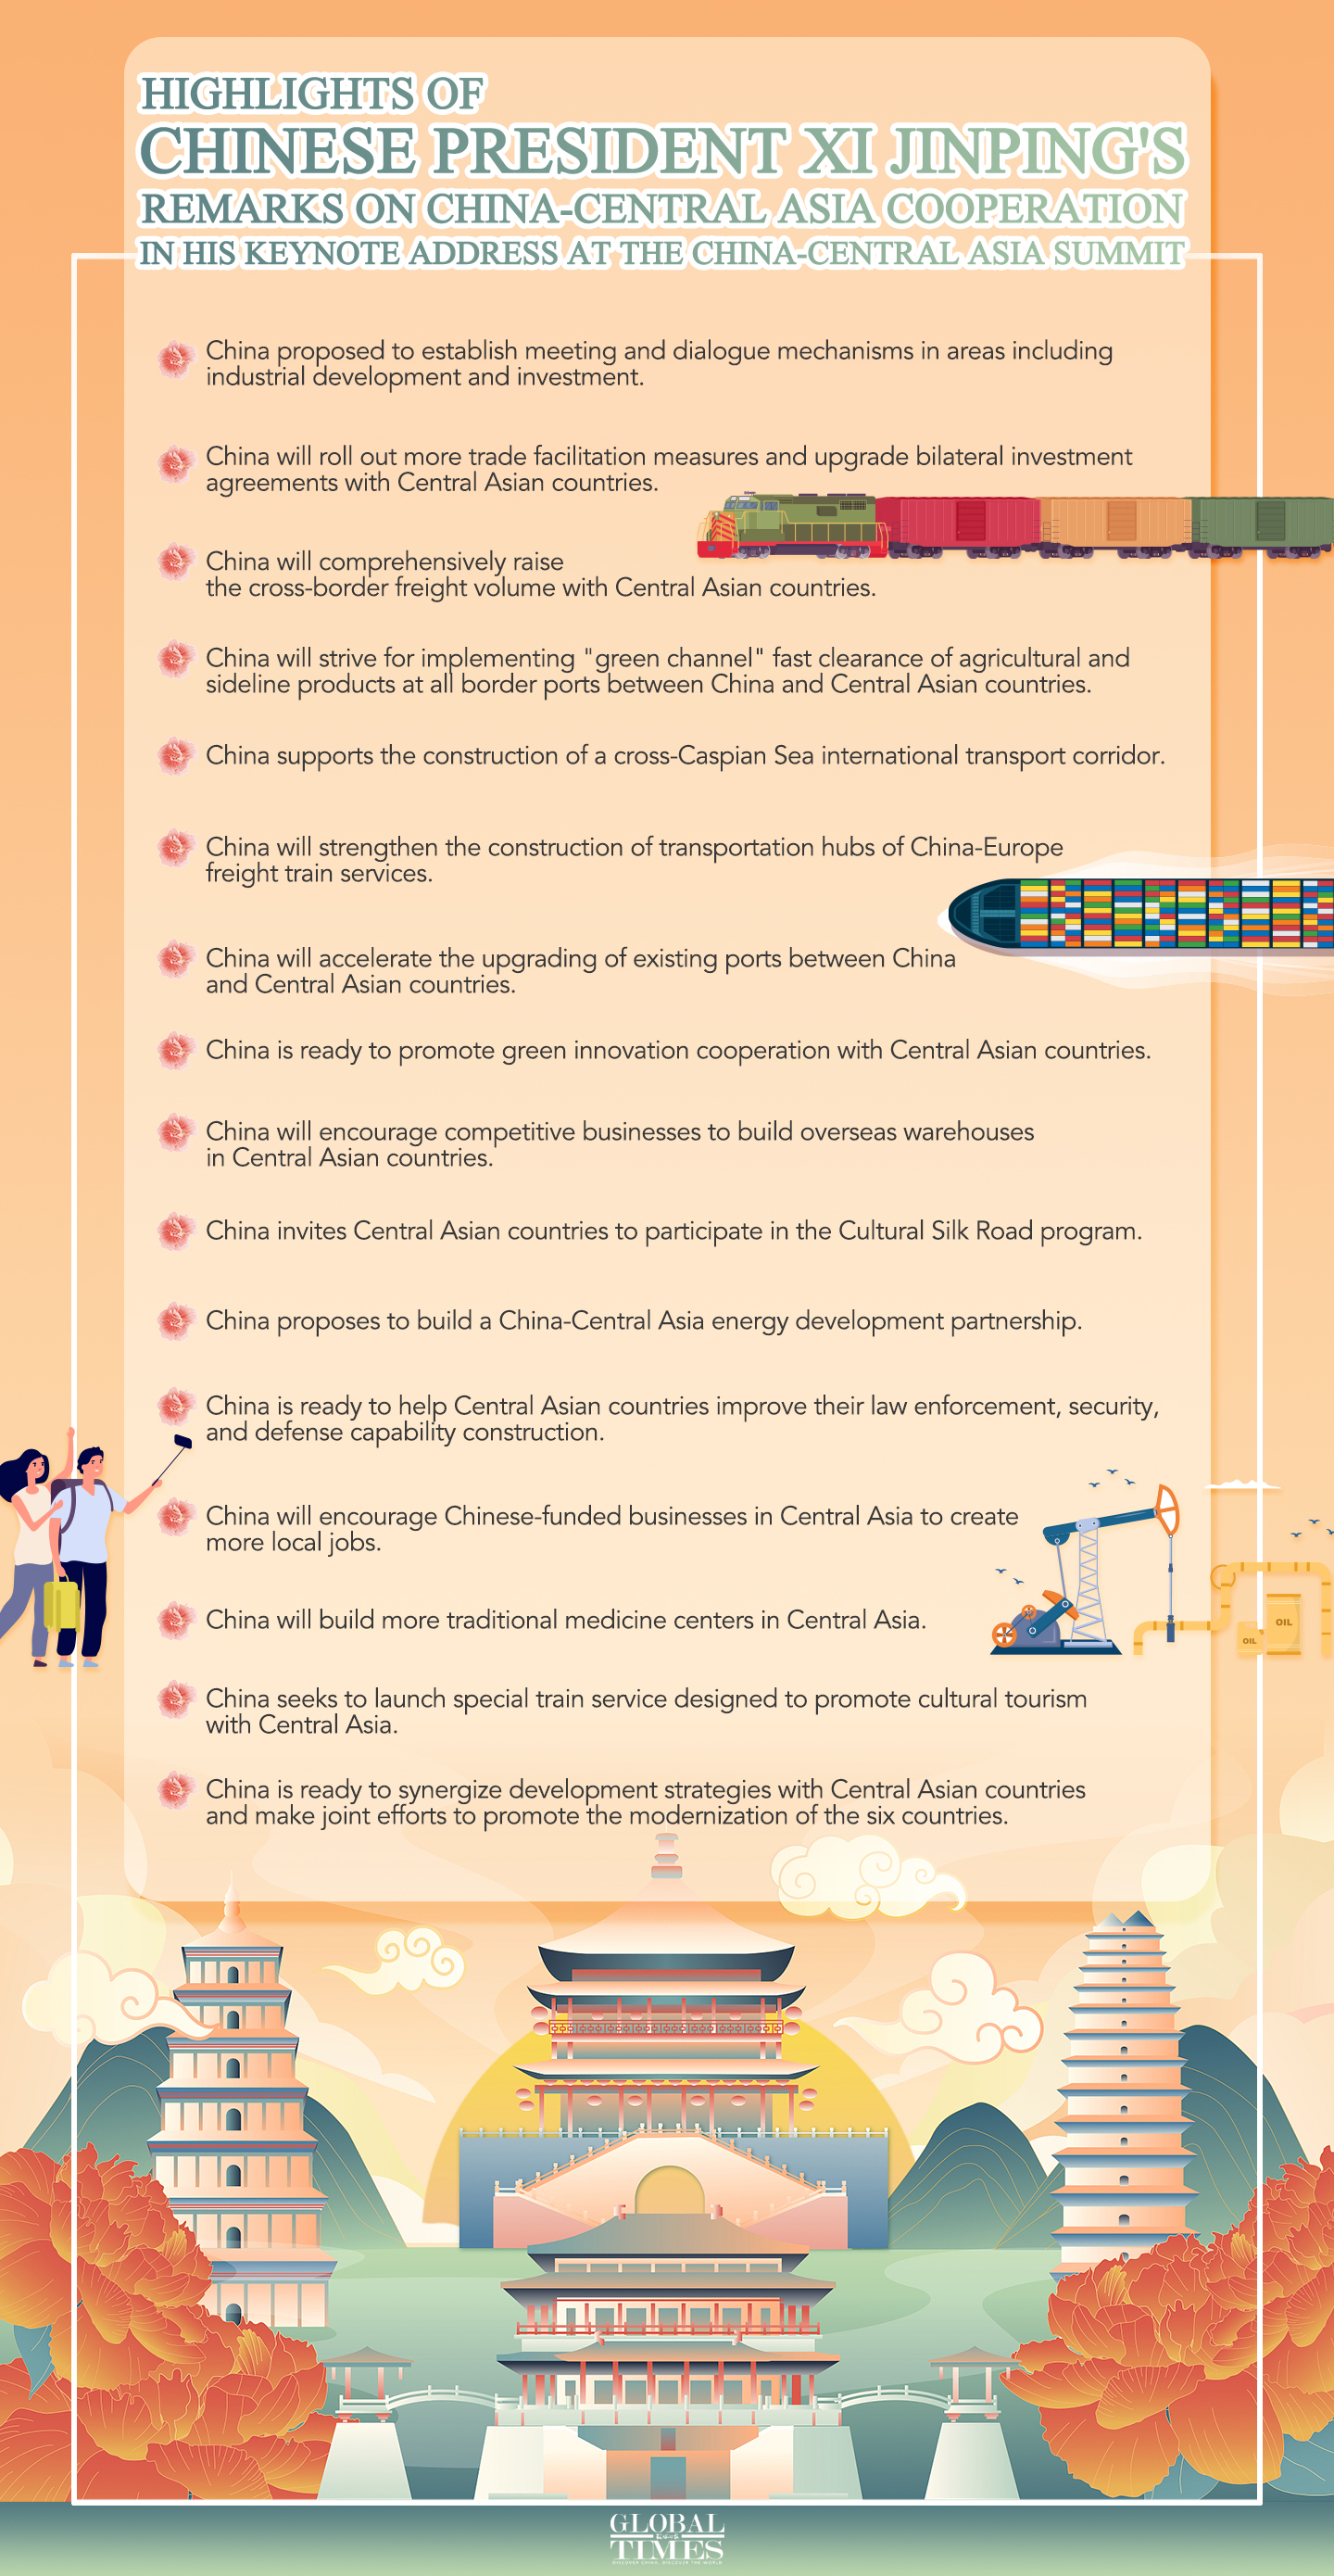 Highlights of Chinese President Xi Jinping's remarks on China-Central Asia cooperation in his keynote address at the China-Central Asia Summit. Graphic: GT